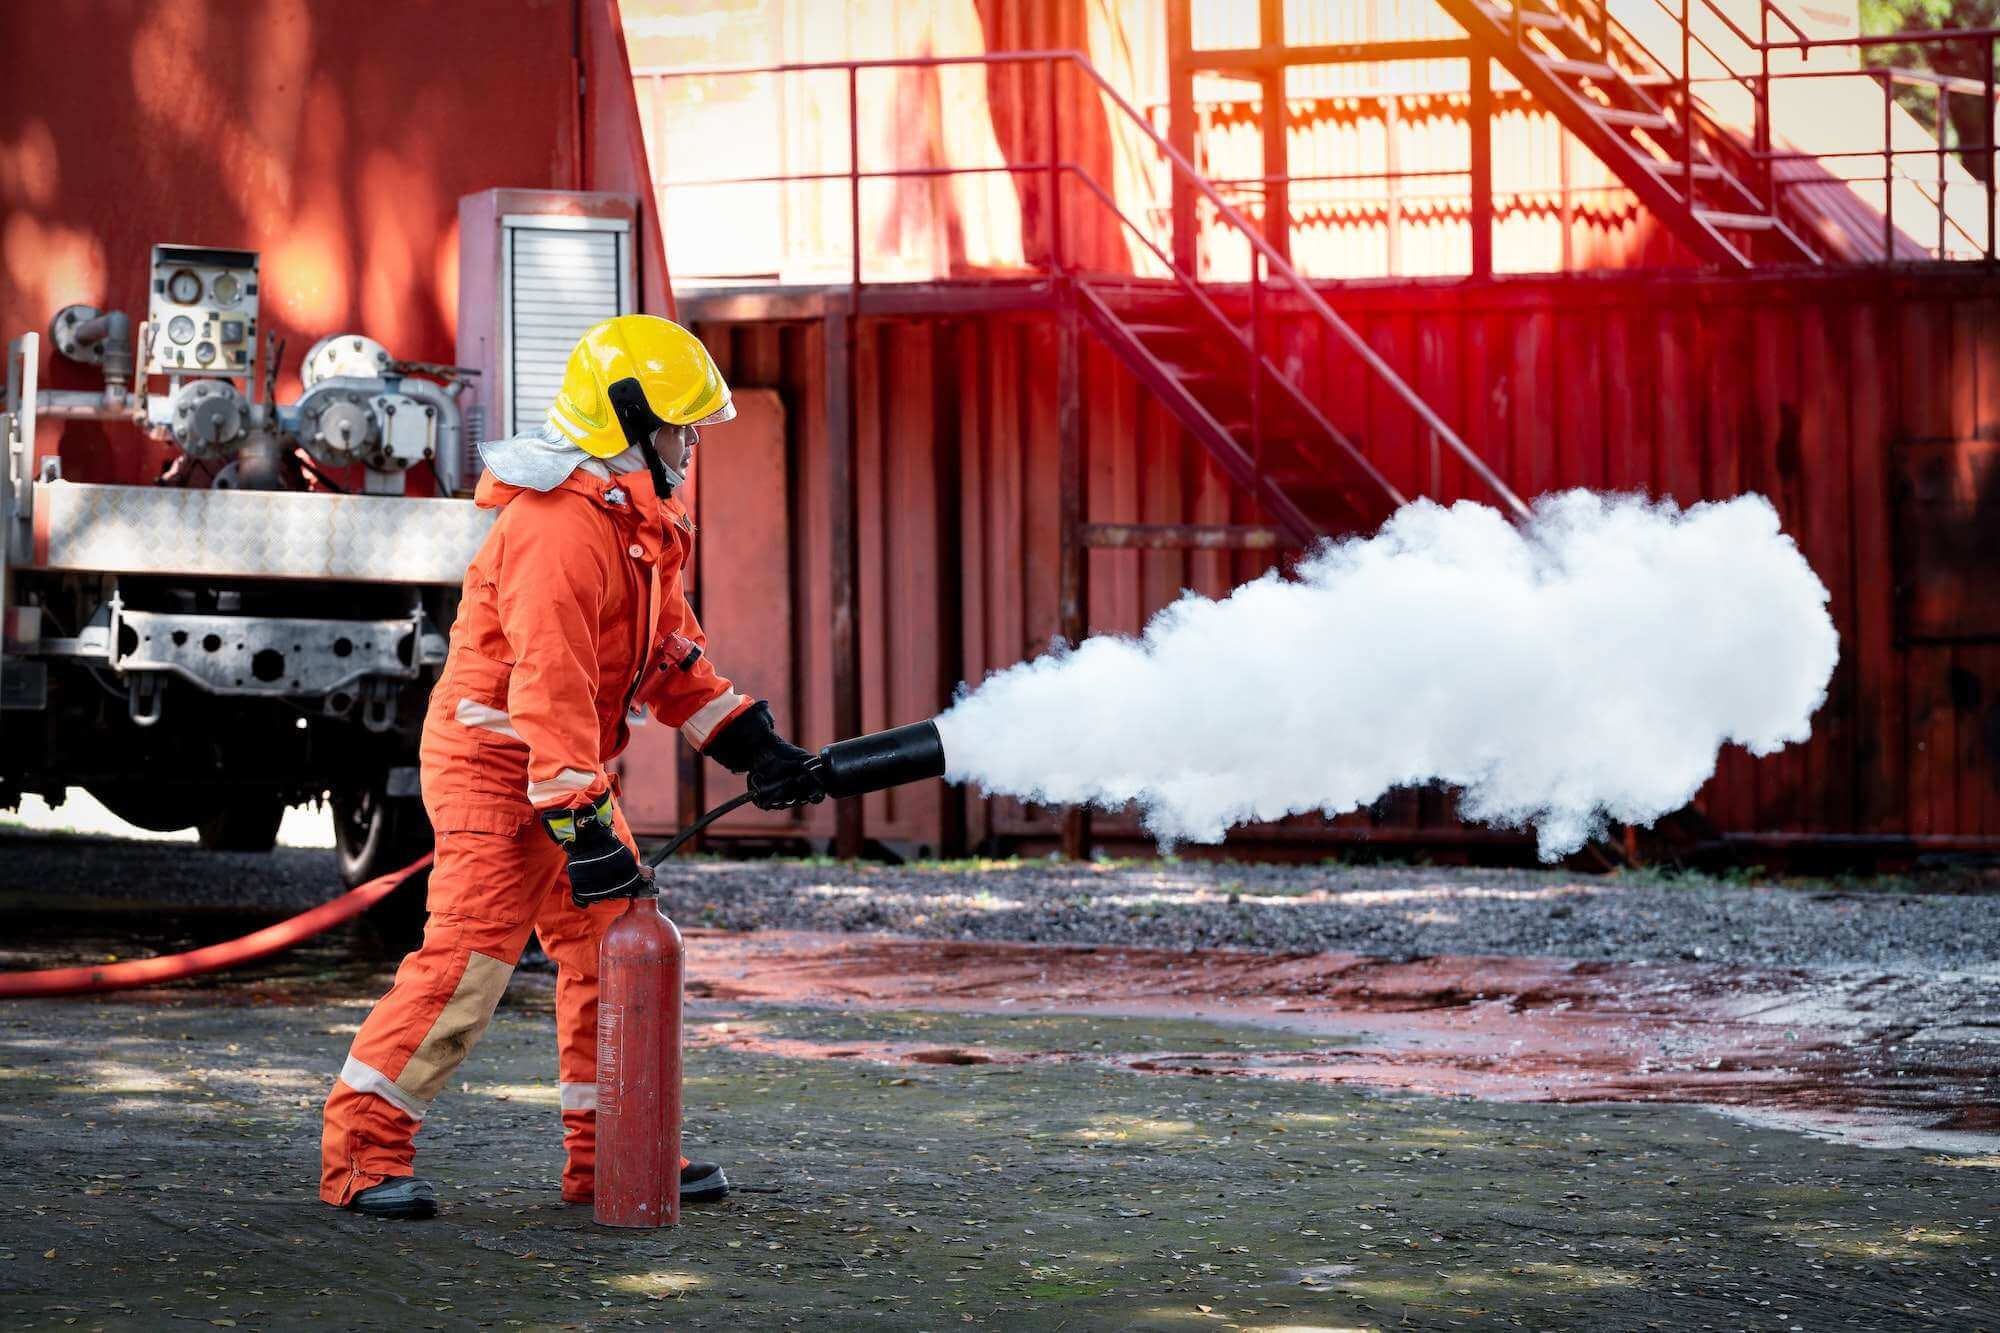 Fire Marshall Course - Fireman wearing firefighting suite using fire extinguisher fighting fire equipment and accessories